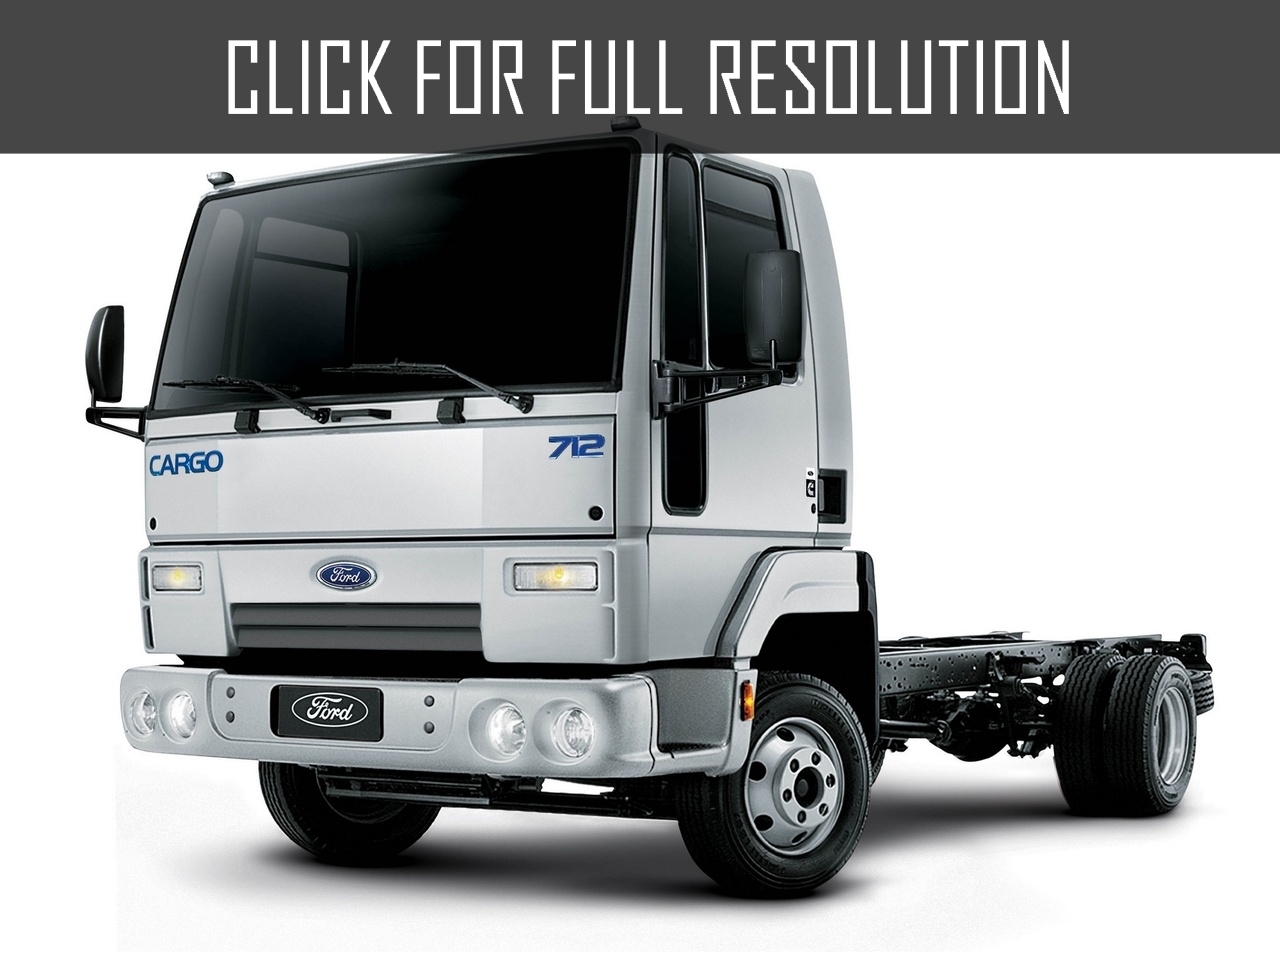 Ford Cargo 712